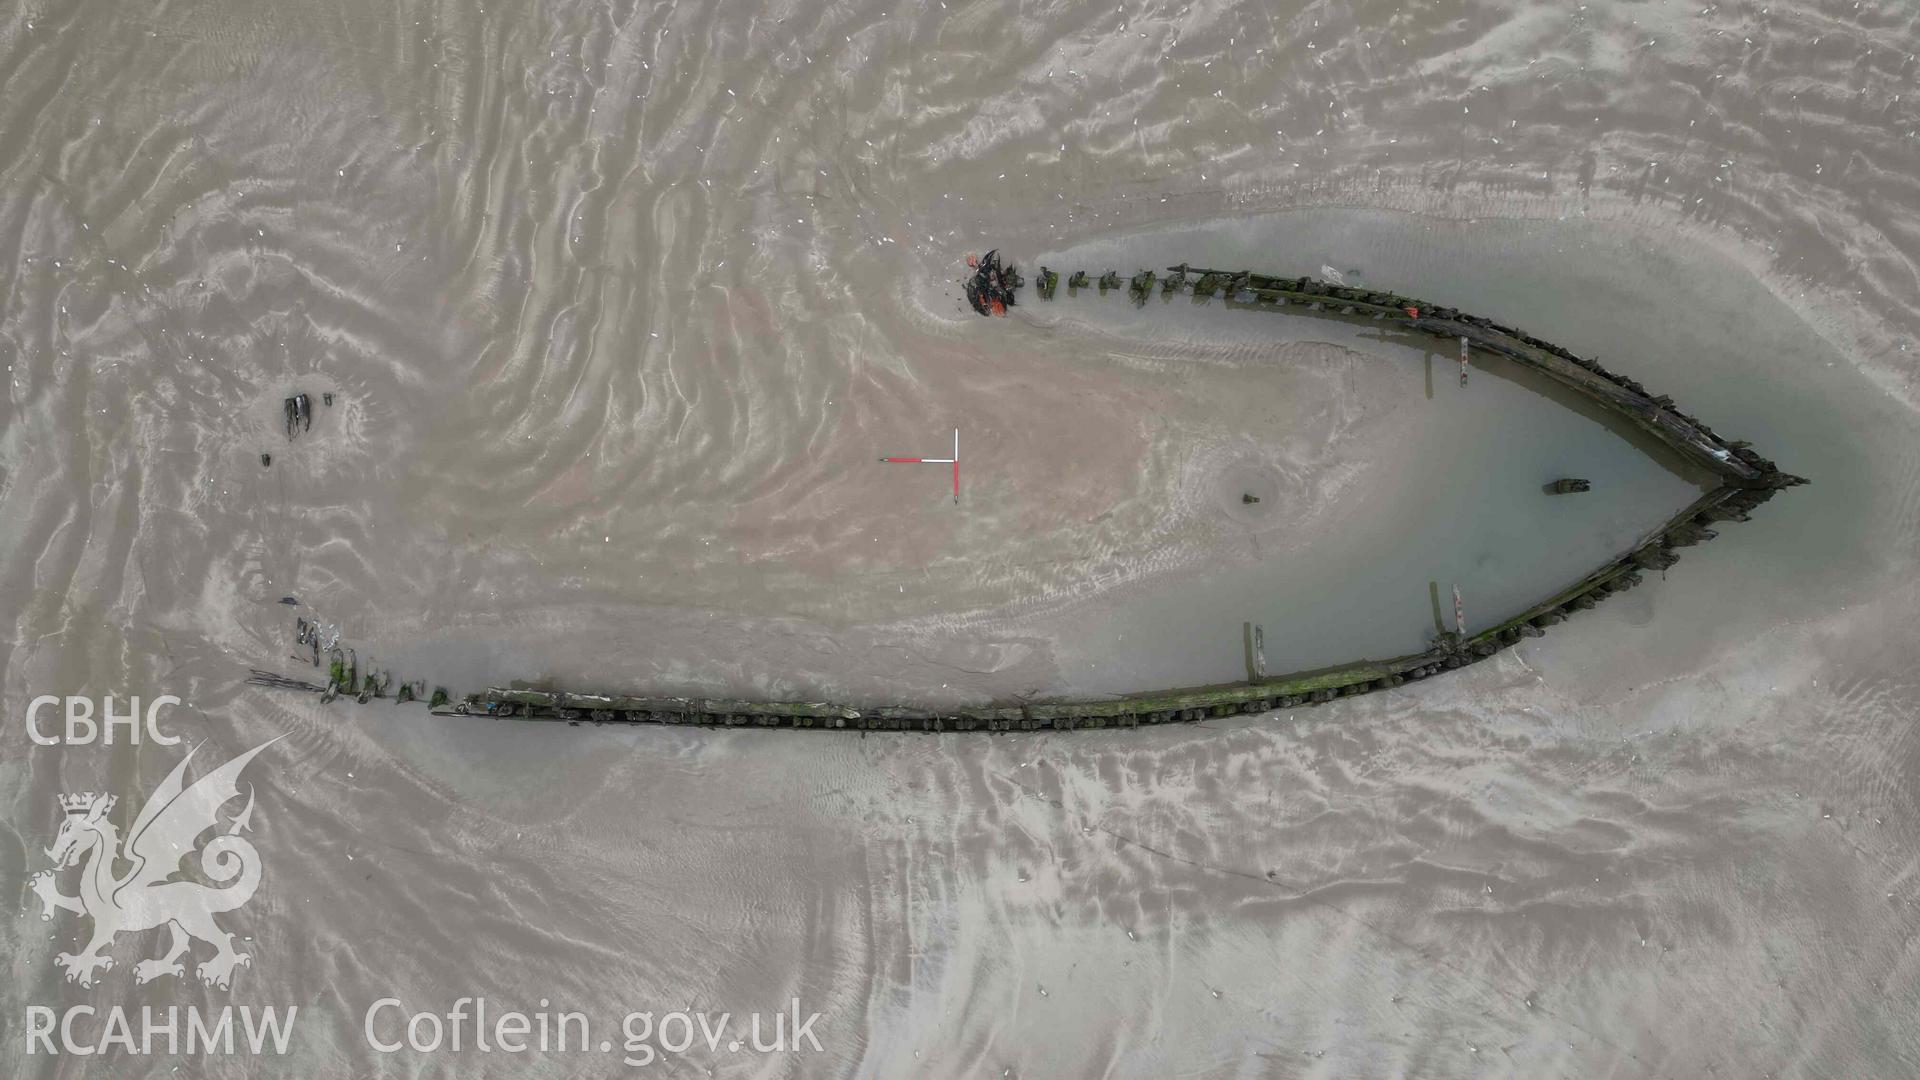 Cefn Sidan wreck 2. Overhead view taken on 21/02/2023. North is to the left, scales are 1m. The bow of the ship is to the south (right).